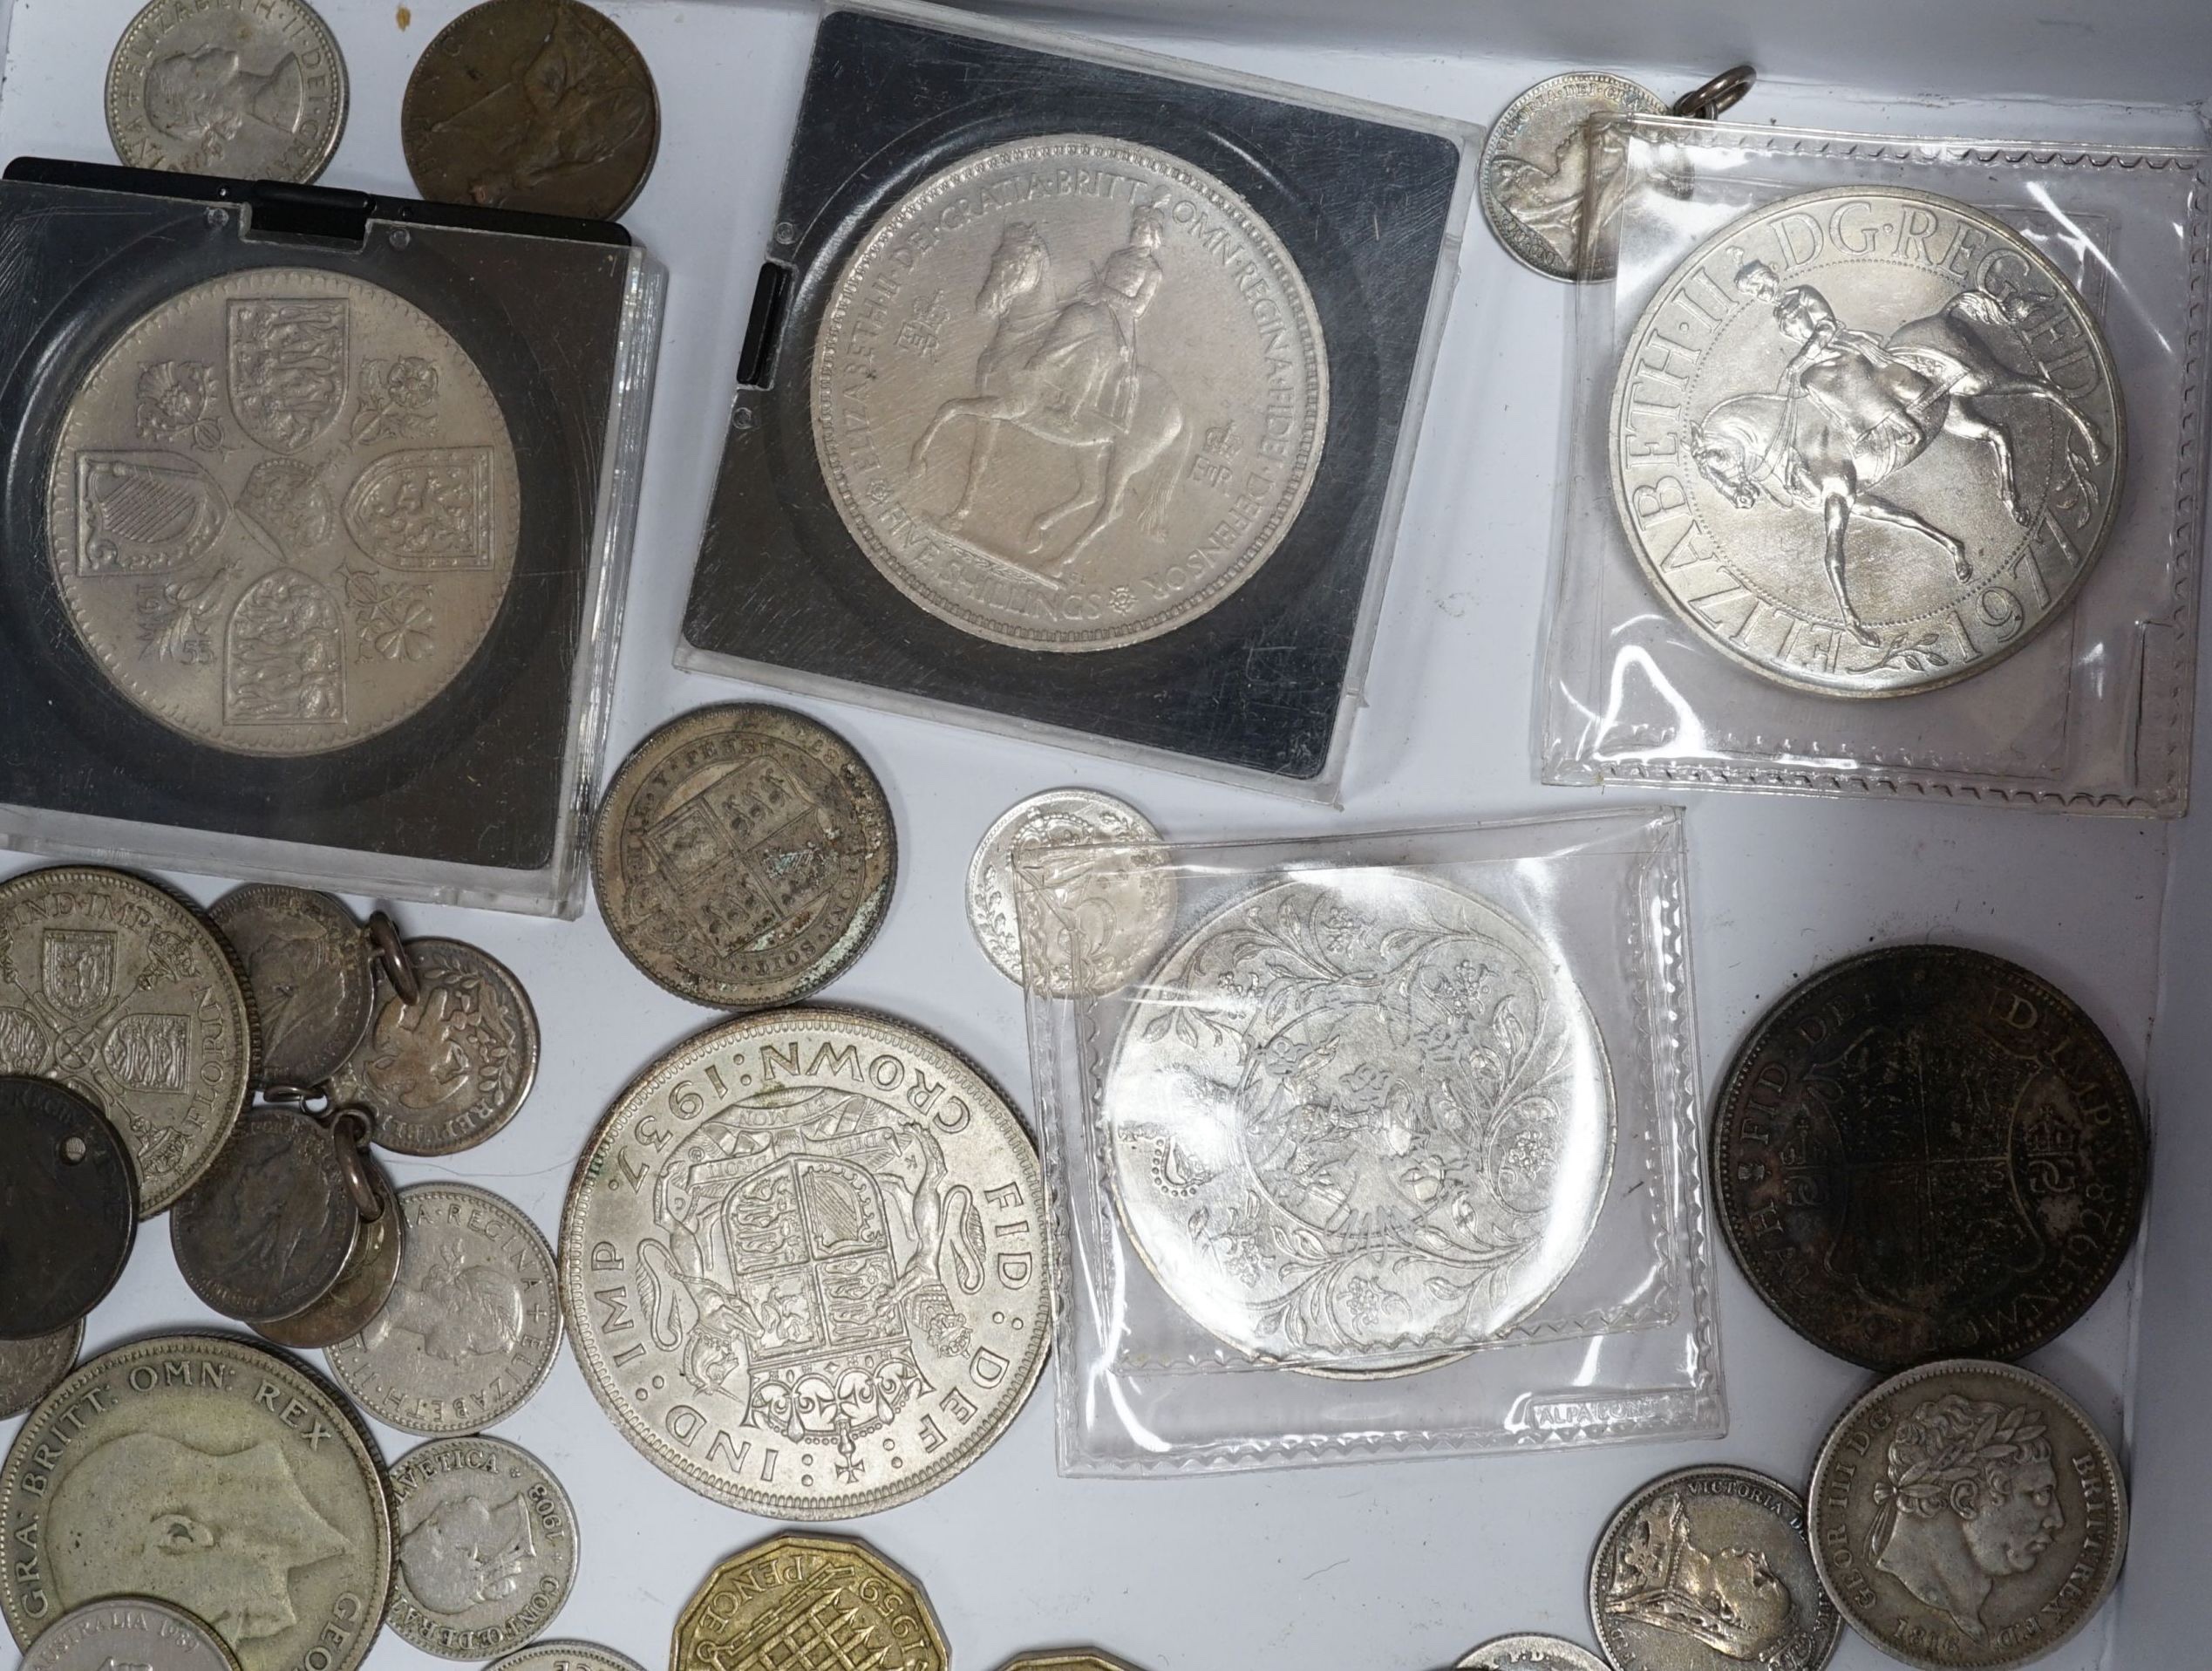 A group of UK coins including 1819, 1821 and 1891 crowns, two 1887 half crowns, 1887 florin, etc.